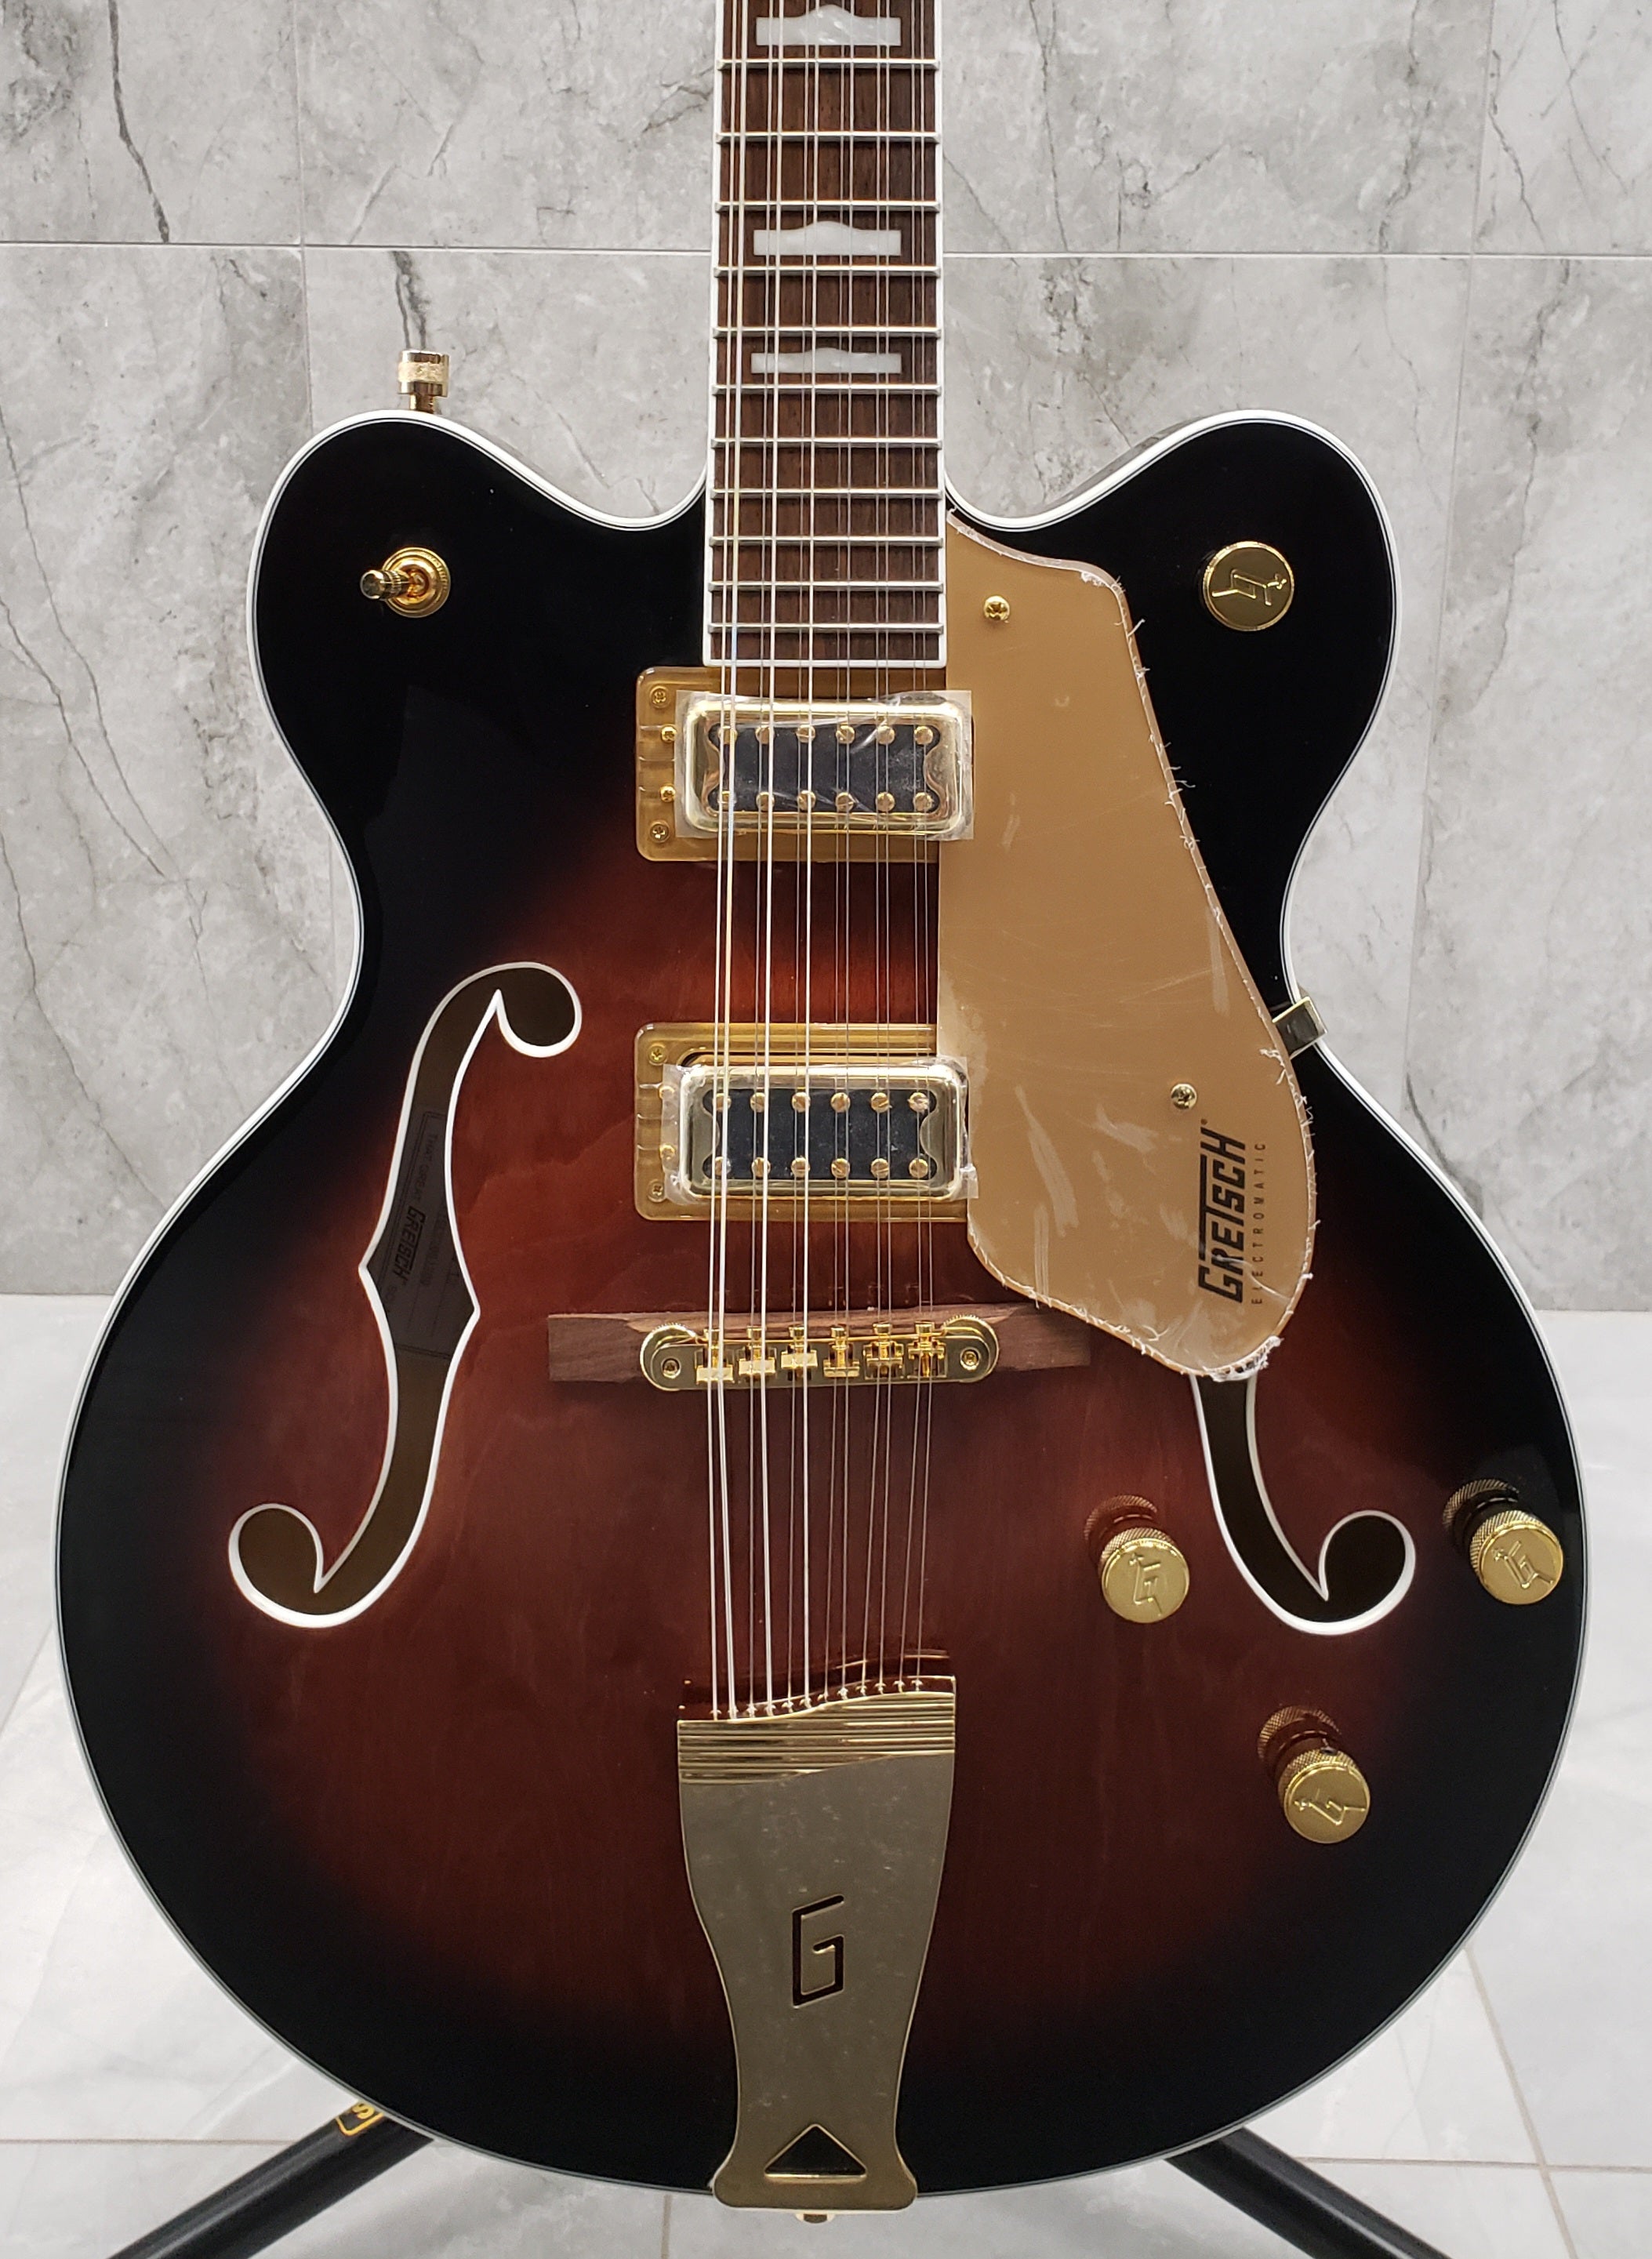  Gretsch G5422G-12 Electromatic Classic Hollow Body Double-Cut  12-String Guitar with Gold Hardware and Laurel Fingerboard (Right-Handed,  Single Barrel Burst) : Musical Instruments